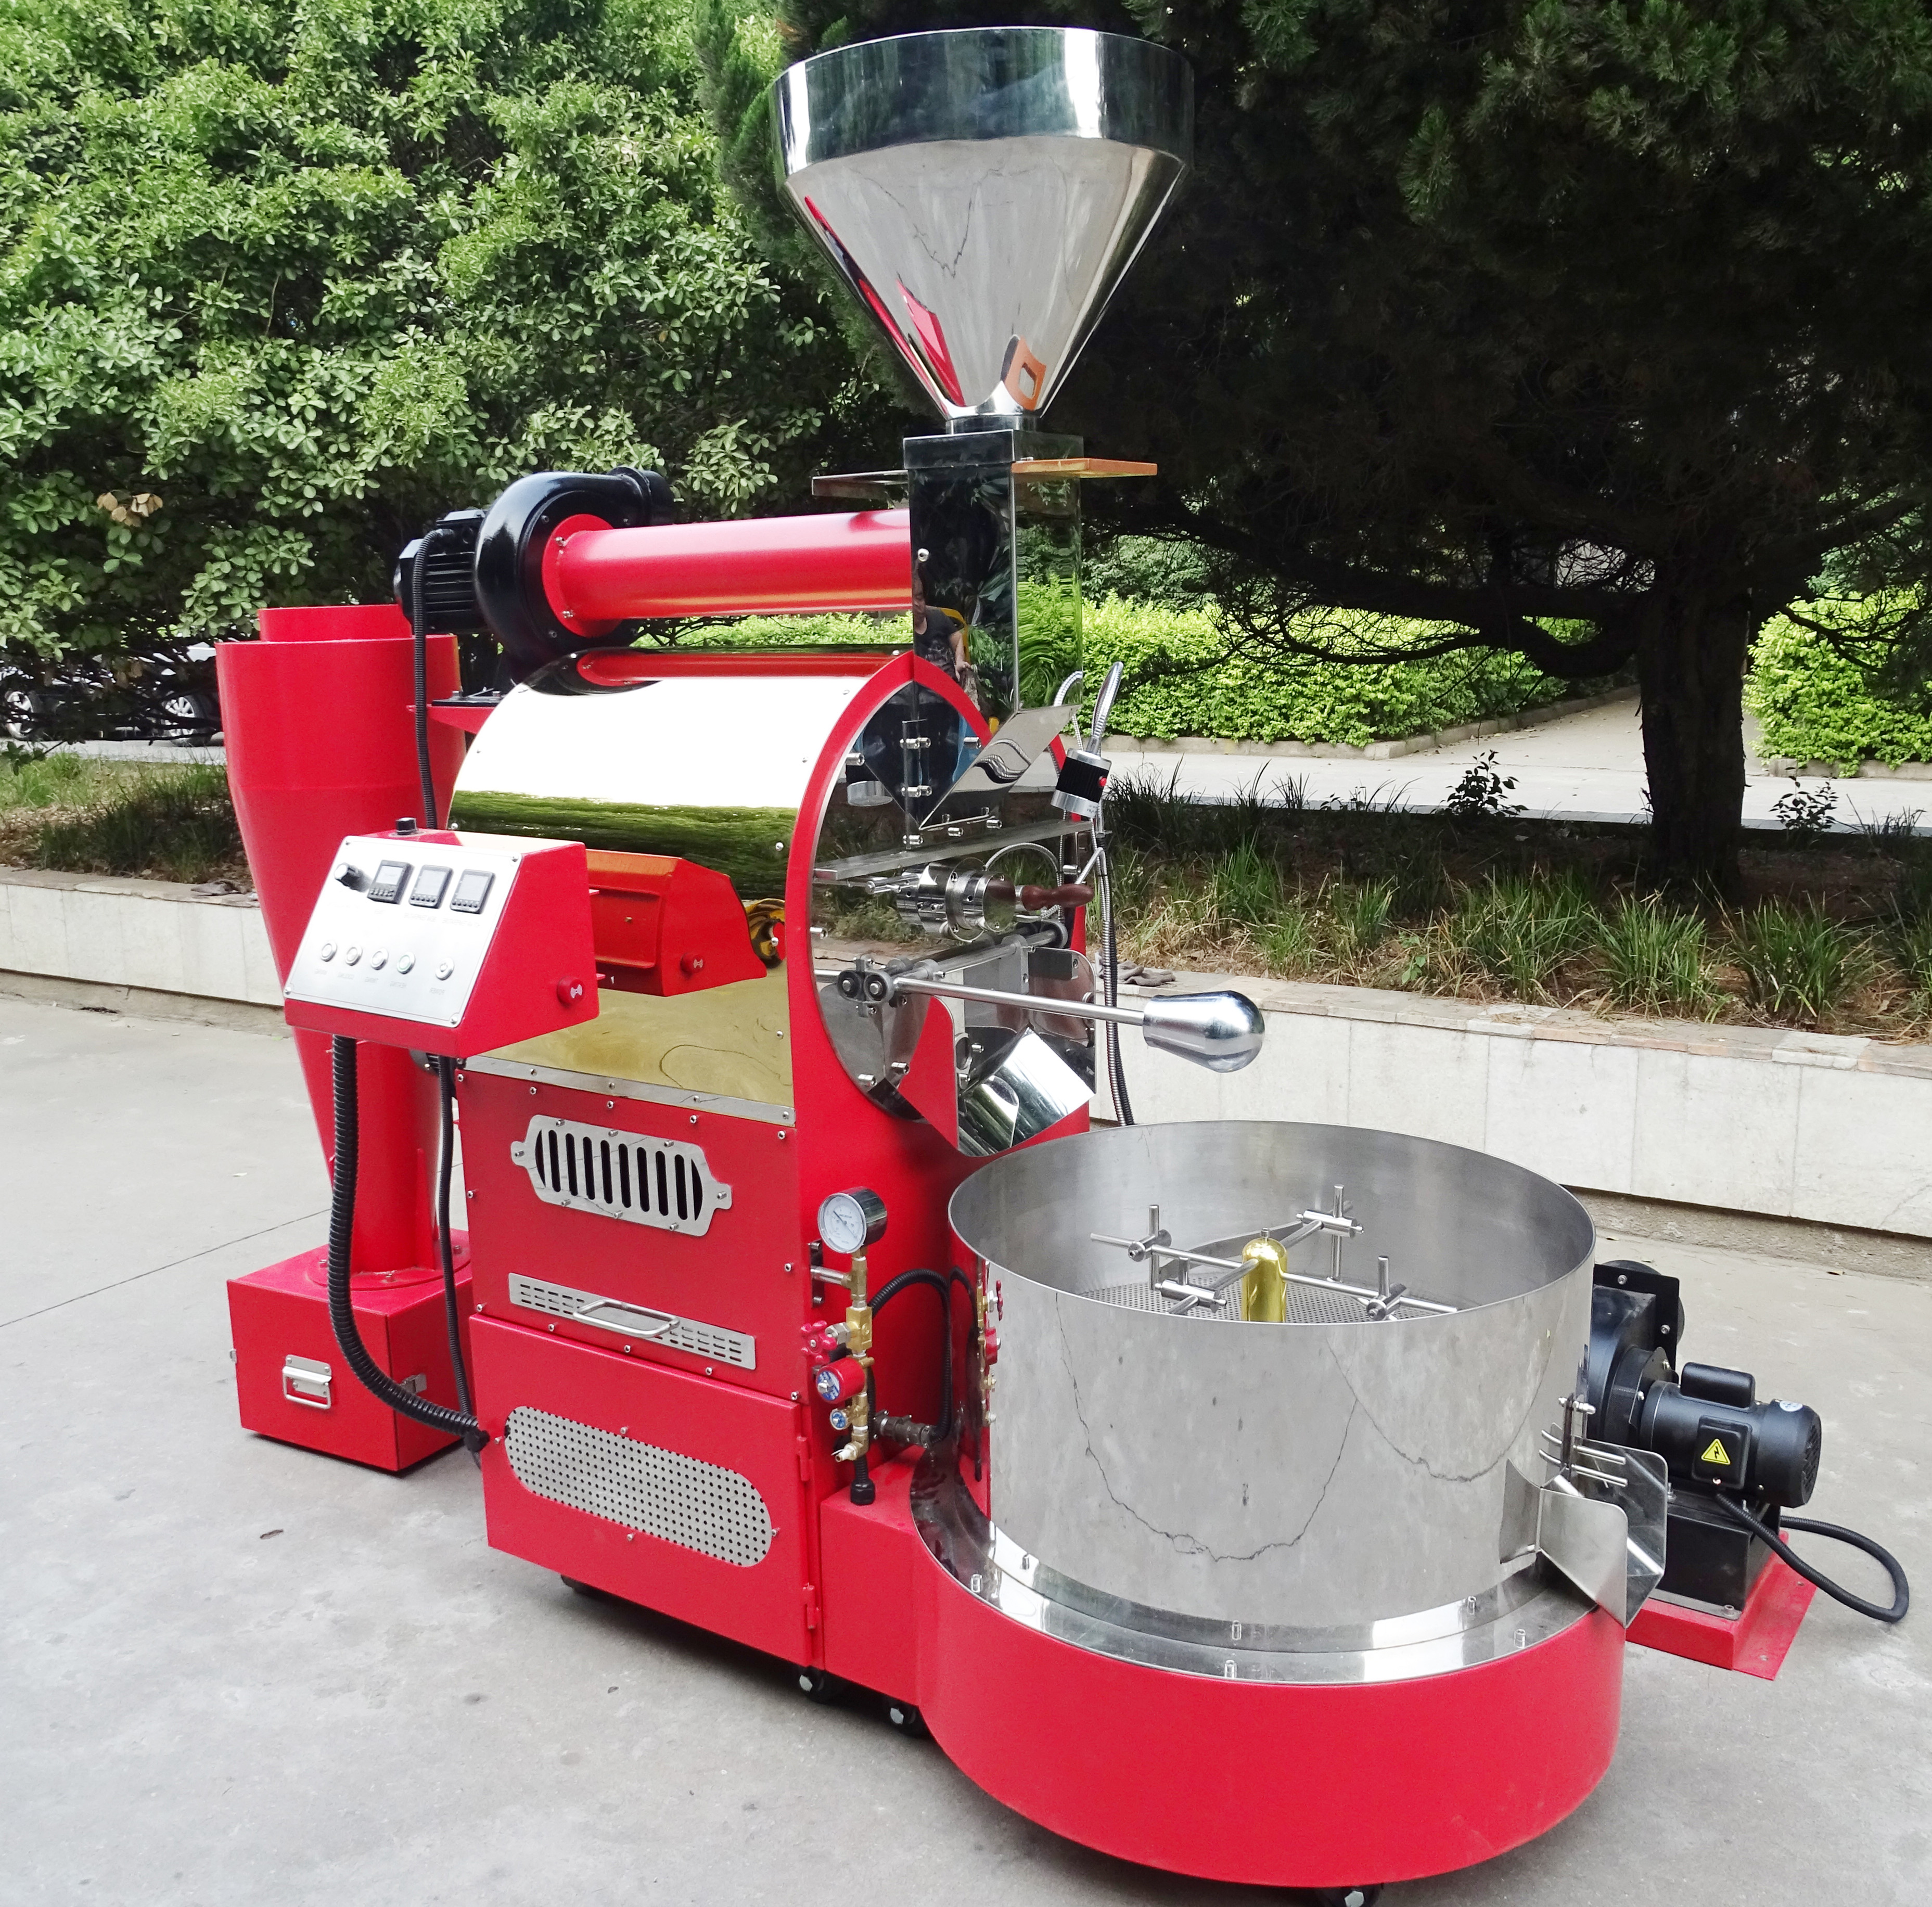 commercial coffee roaster machine